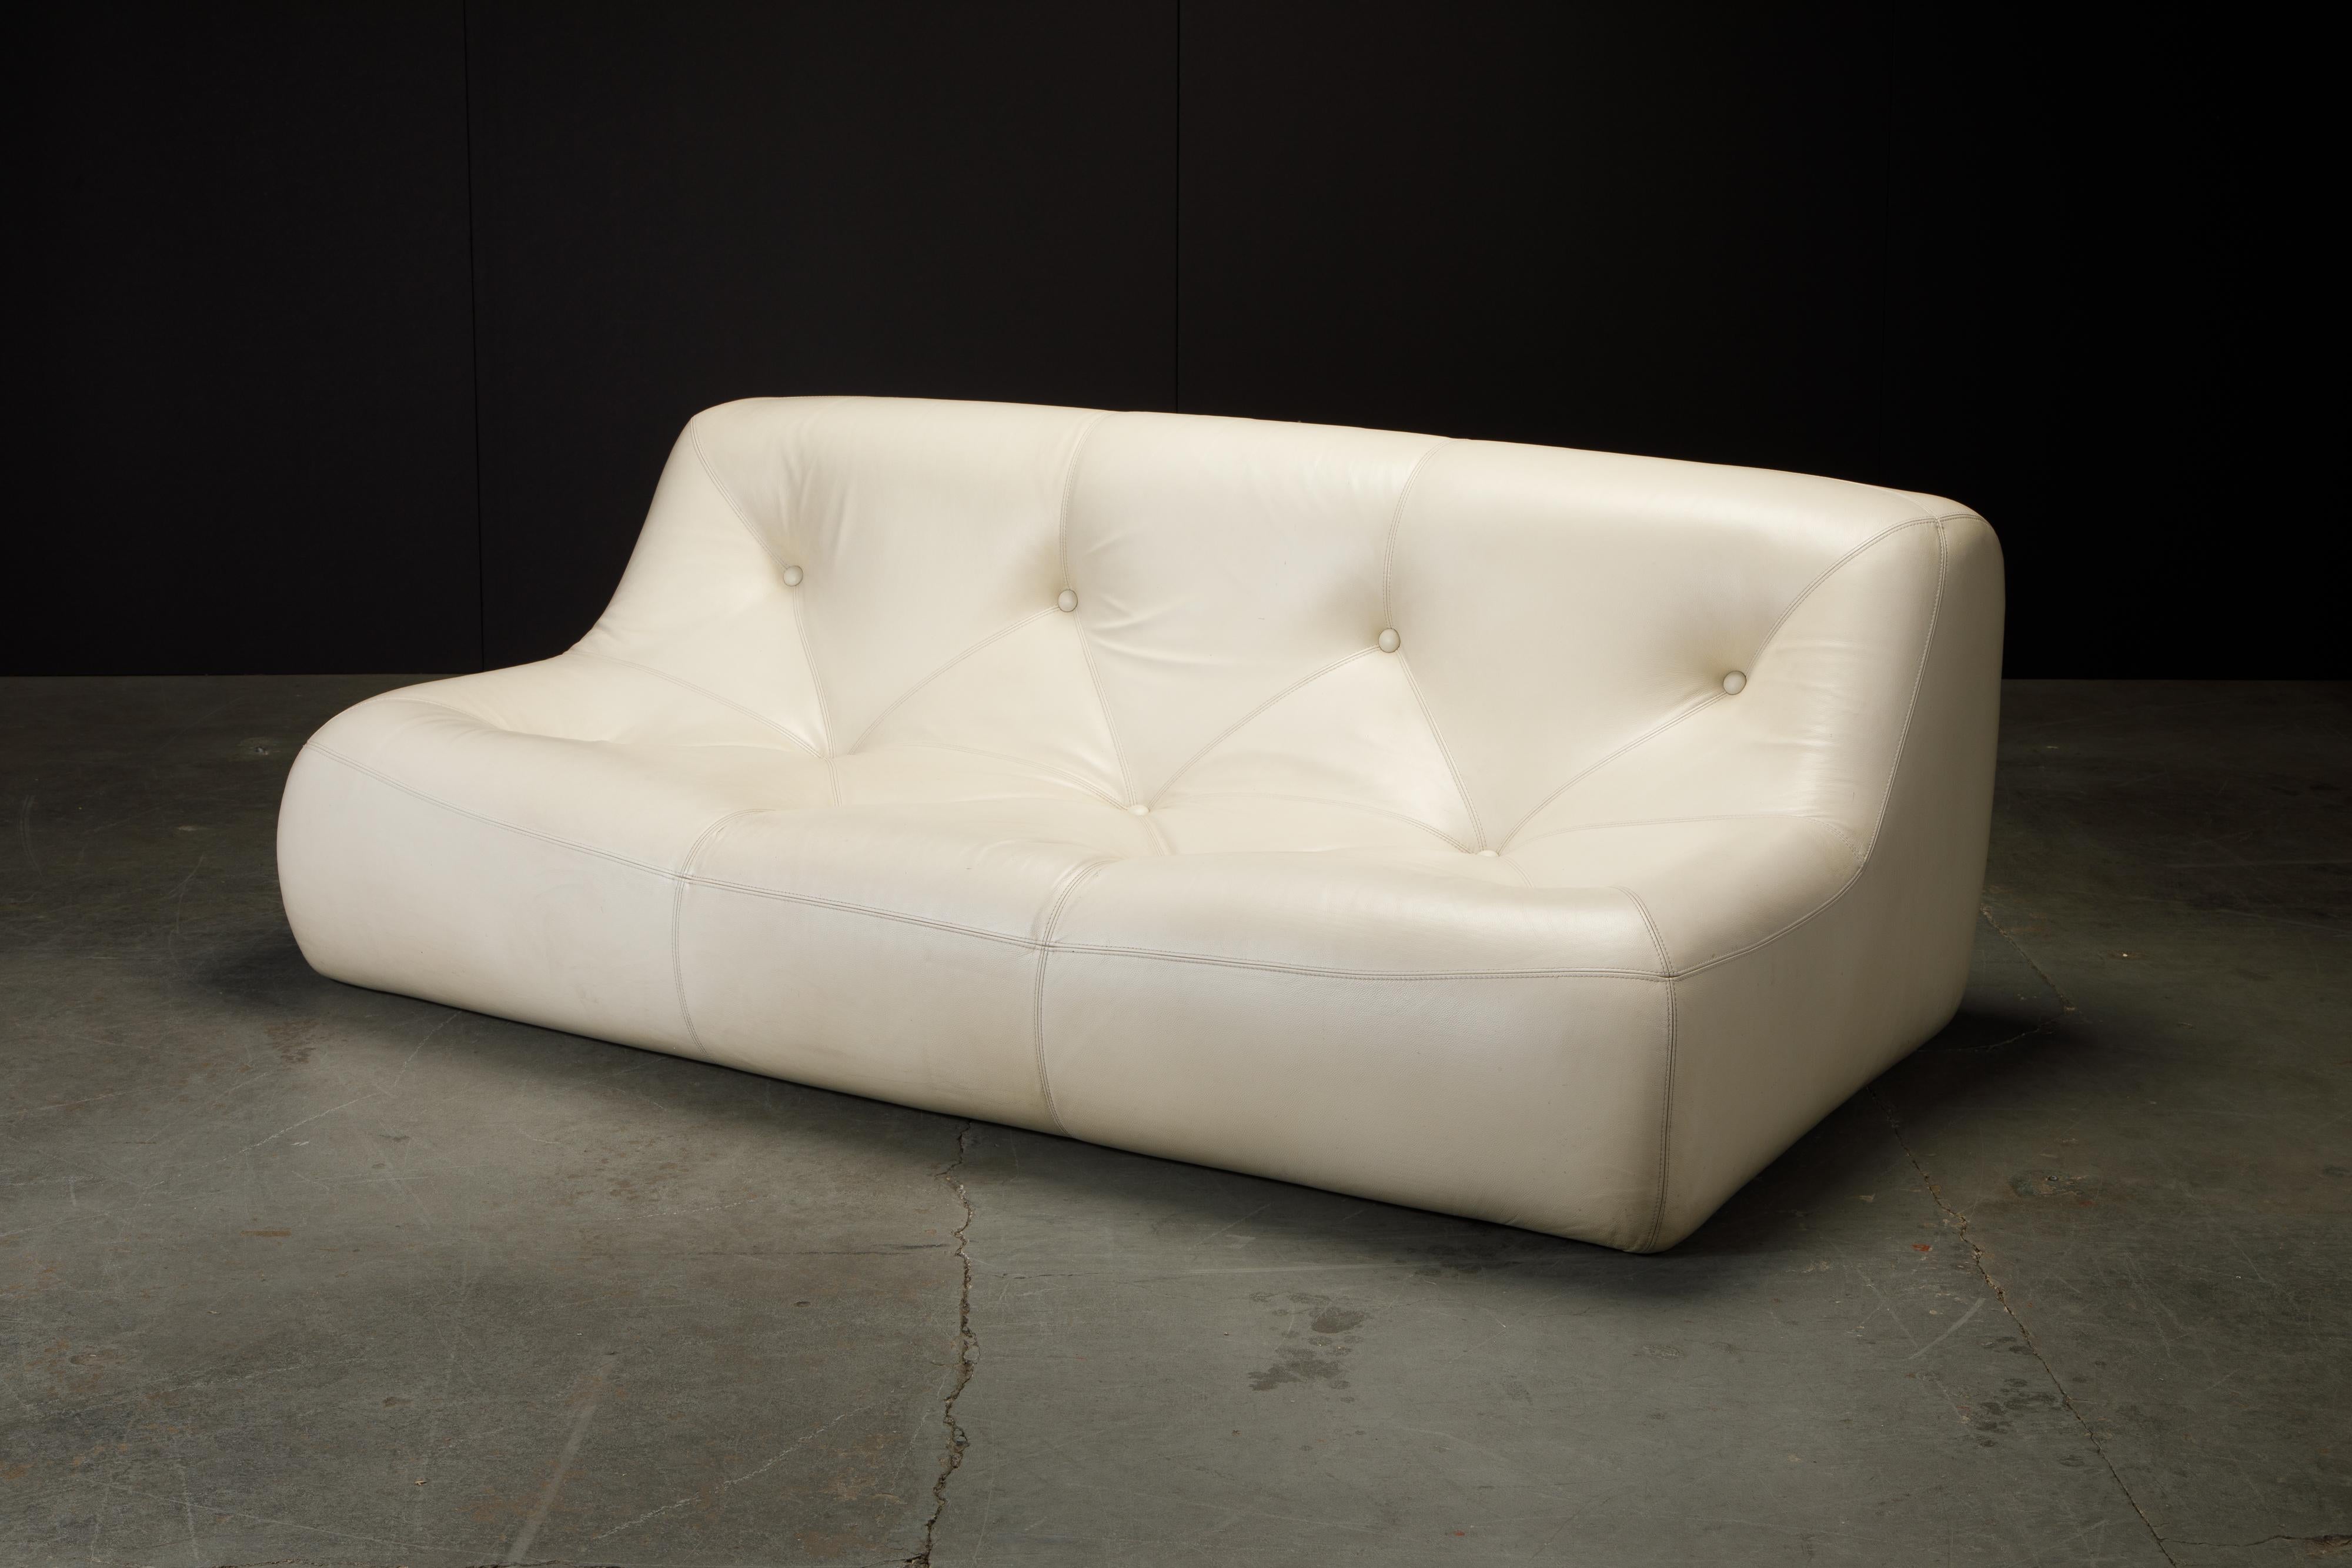 French 'Kali' Leather Sofa by Michel Ducaroy for Ligne Roset, c. 1995, Signed